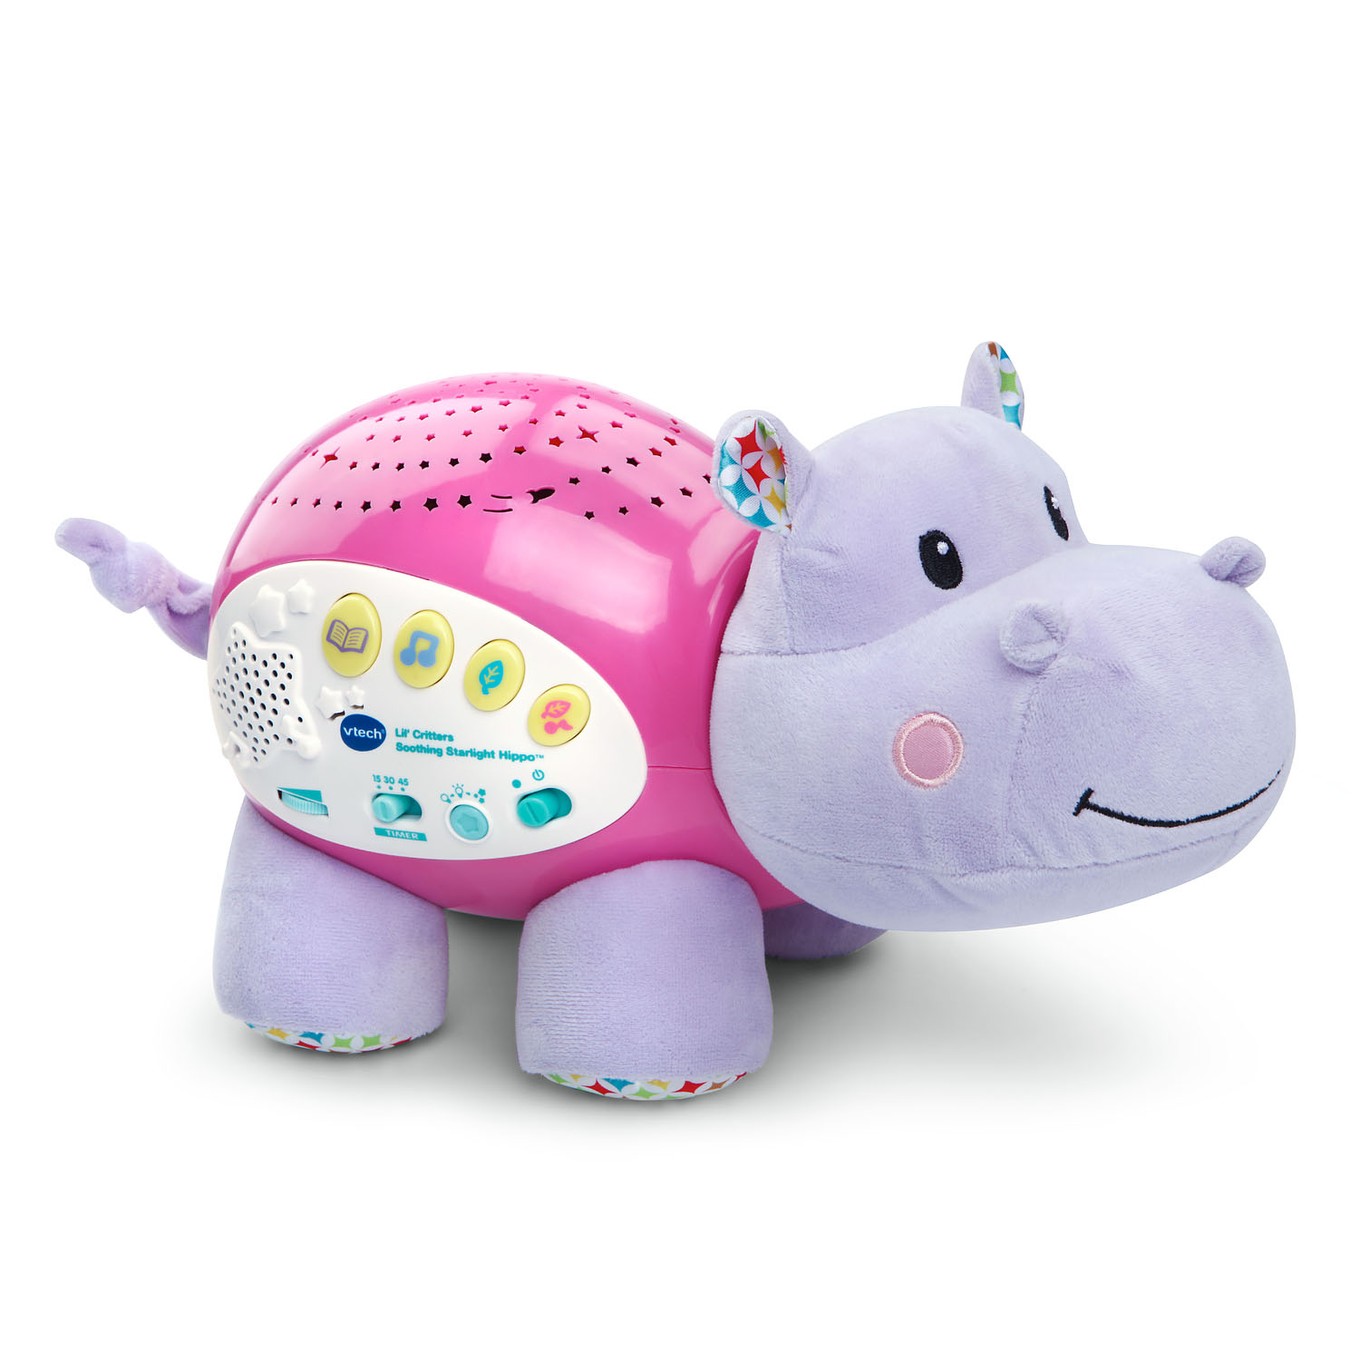 Lil' Critters Soothing Starlight Hippo™